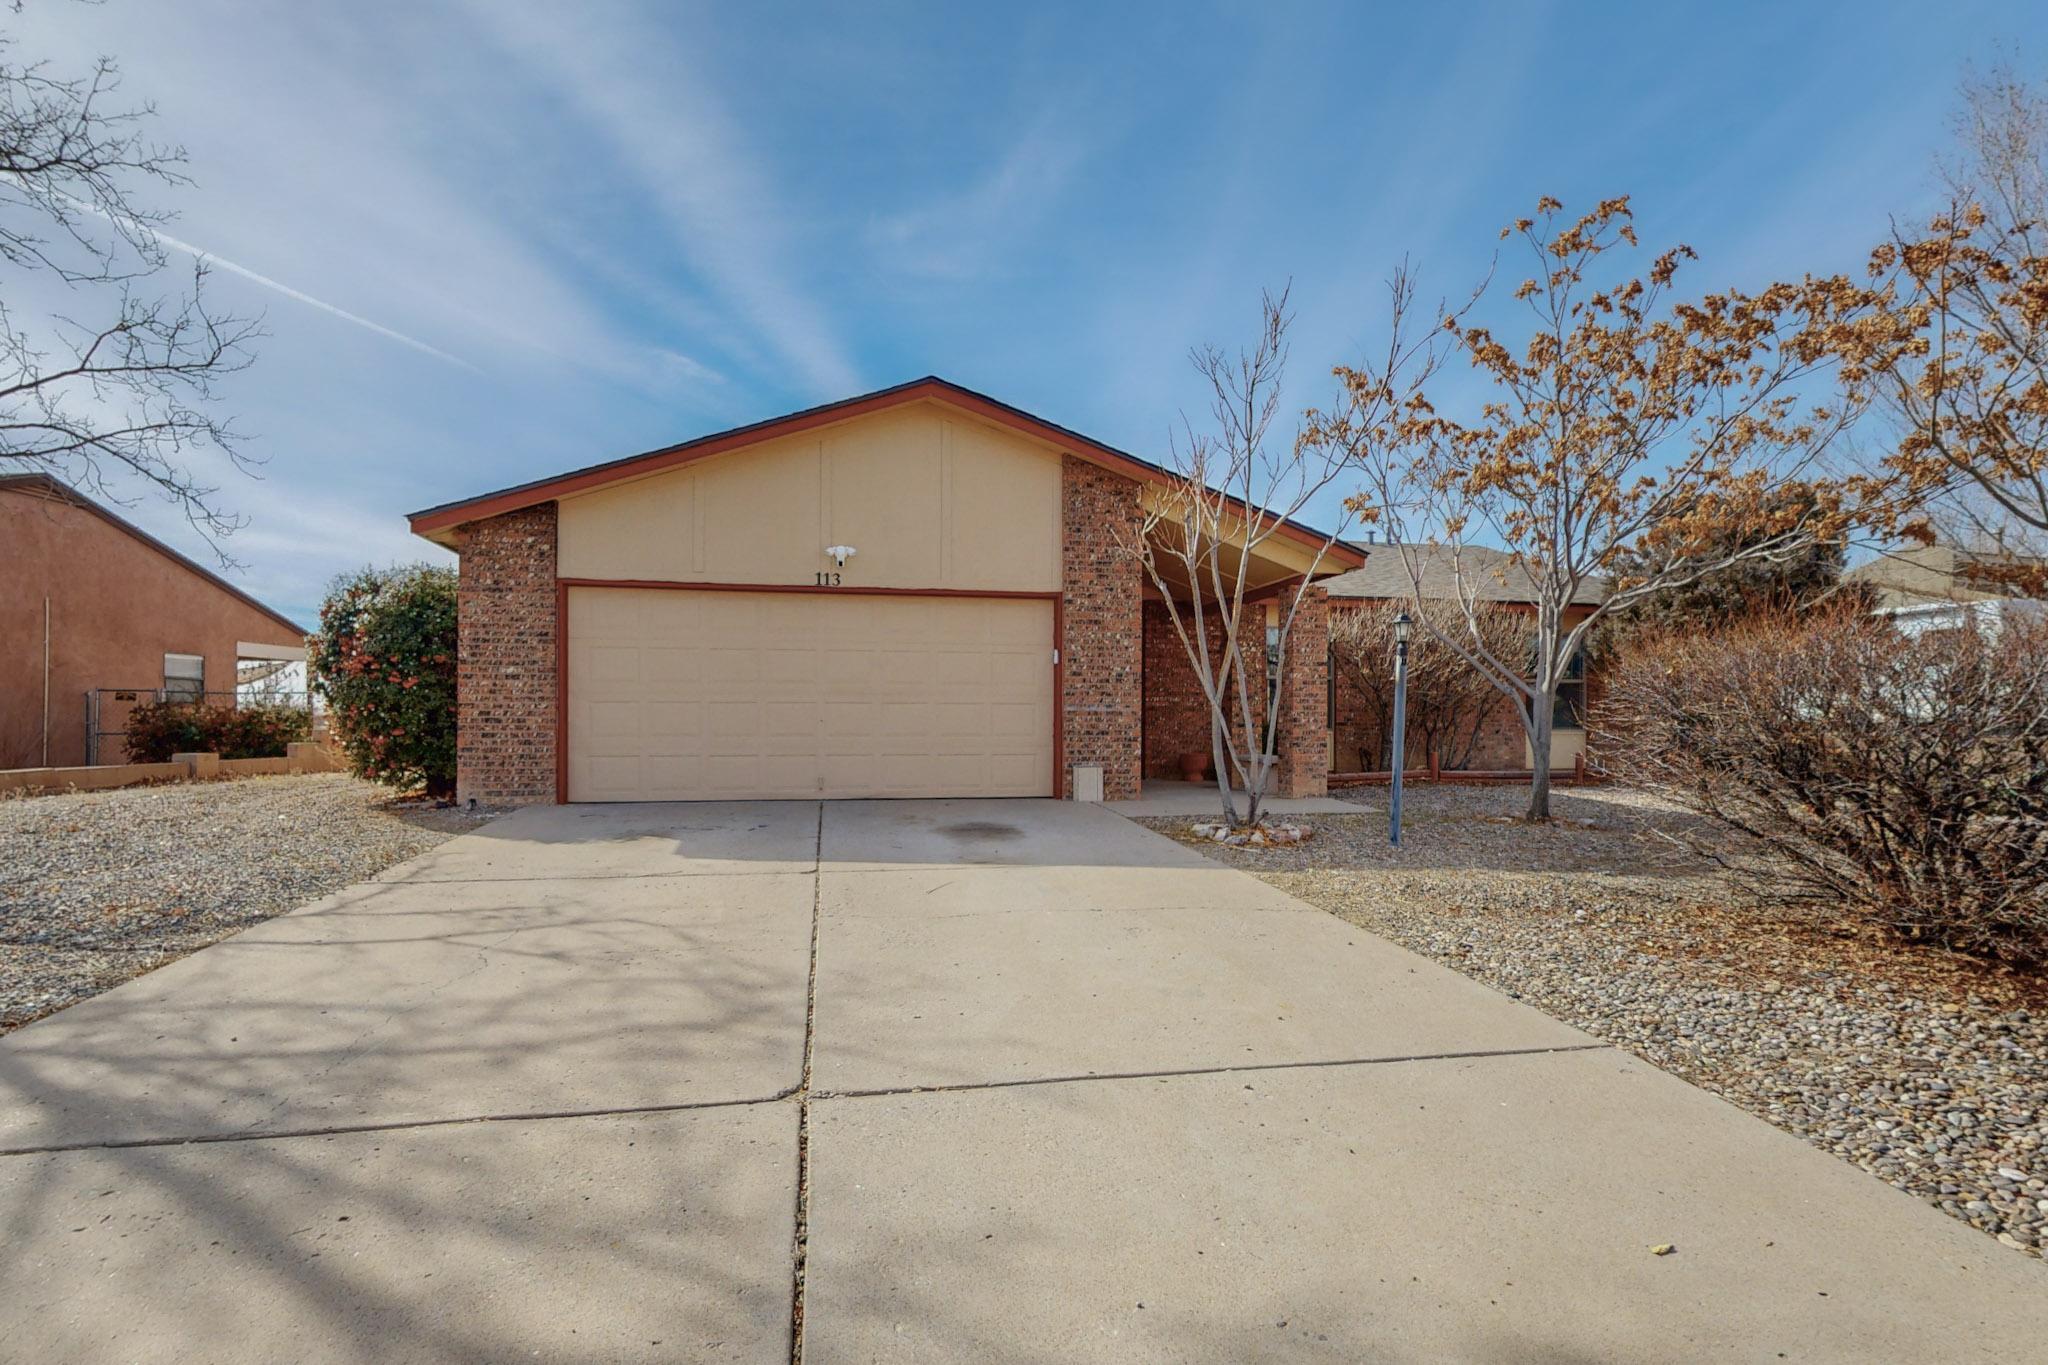 Welcome home!  This home is boasting at over 1600 square feet with open floor plans, stainless steel appliances, fresh paint, AC unit, new water heater, newer furnace and updated roof in 2022. Located in the heart of Rio Rancho, this house is ready for you to call home. Come by and see it today!